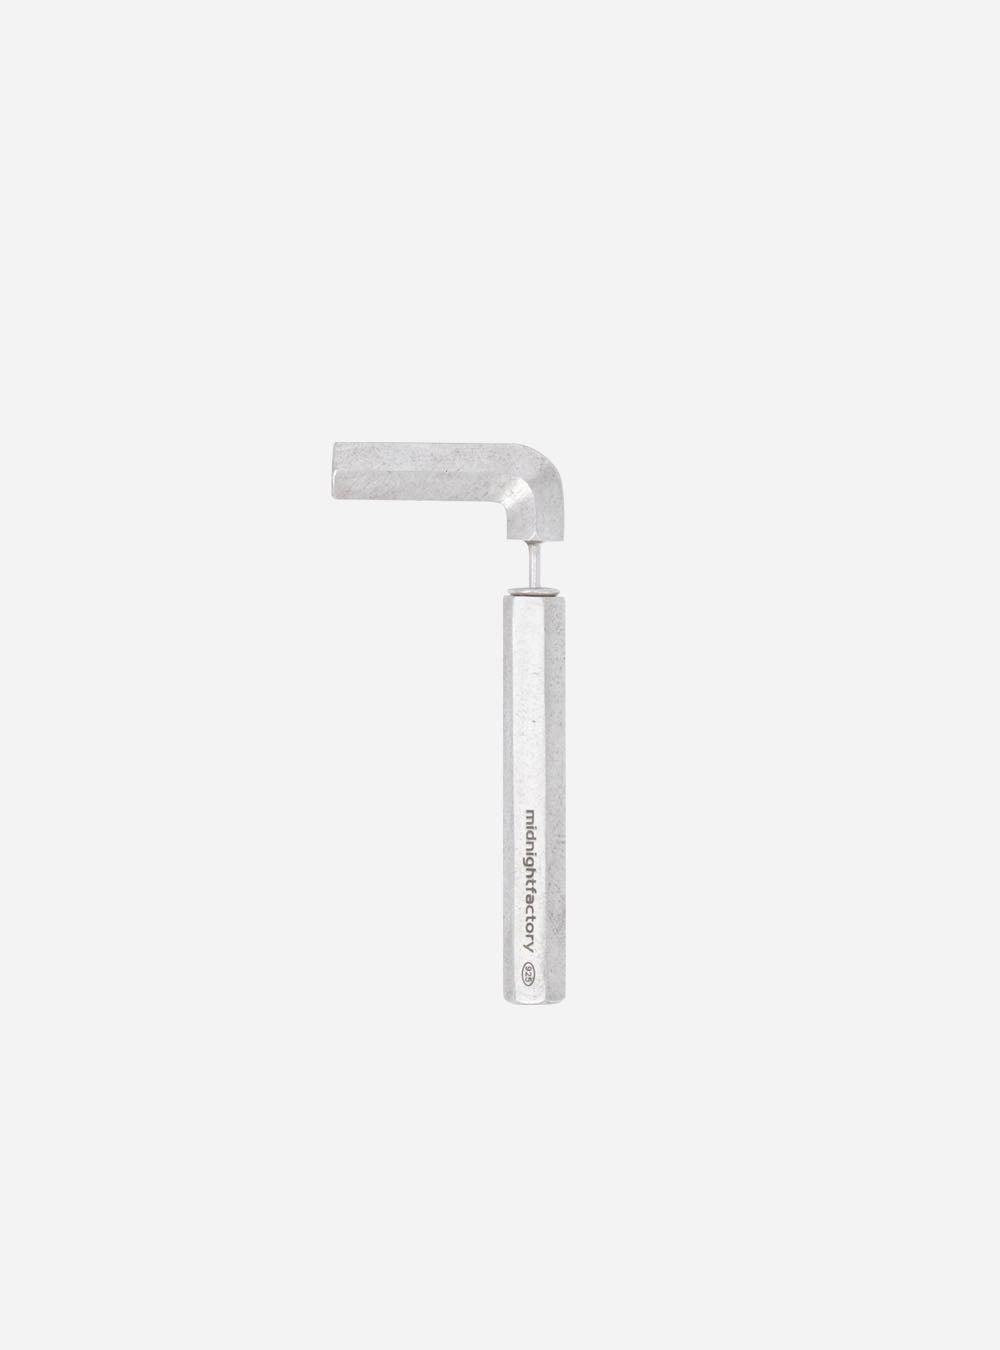 a MIDNIGHTFACTORY HONG KONG Allen-key earring handle on a white background.